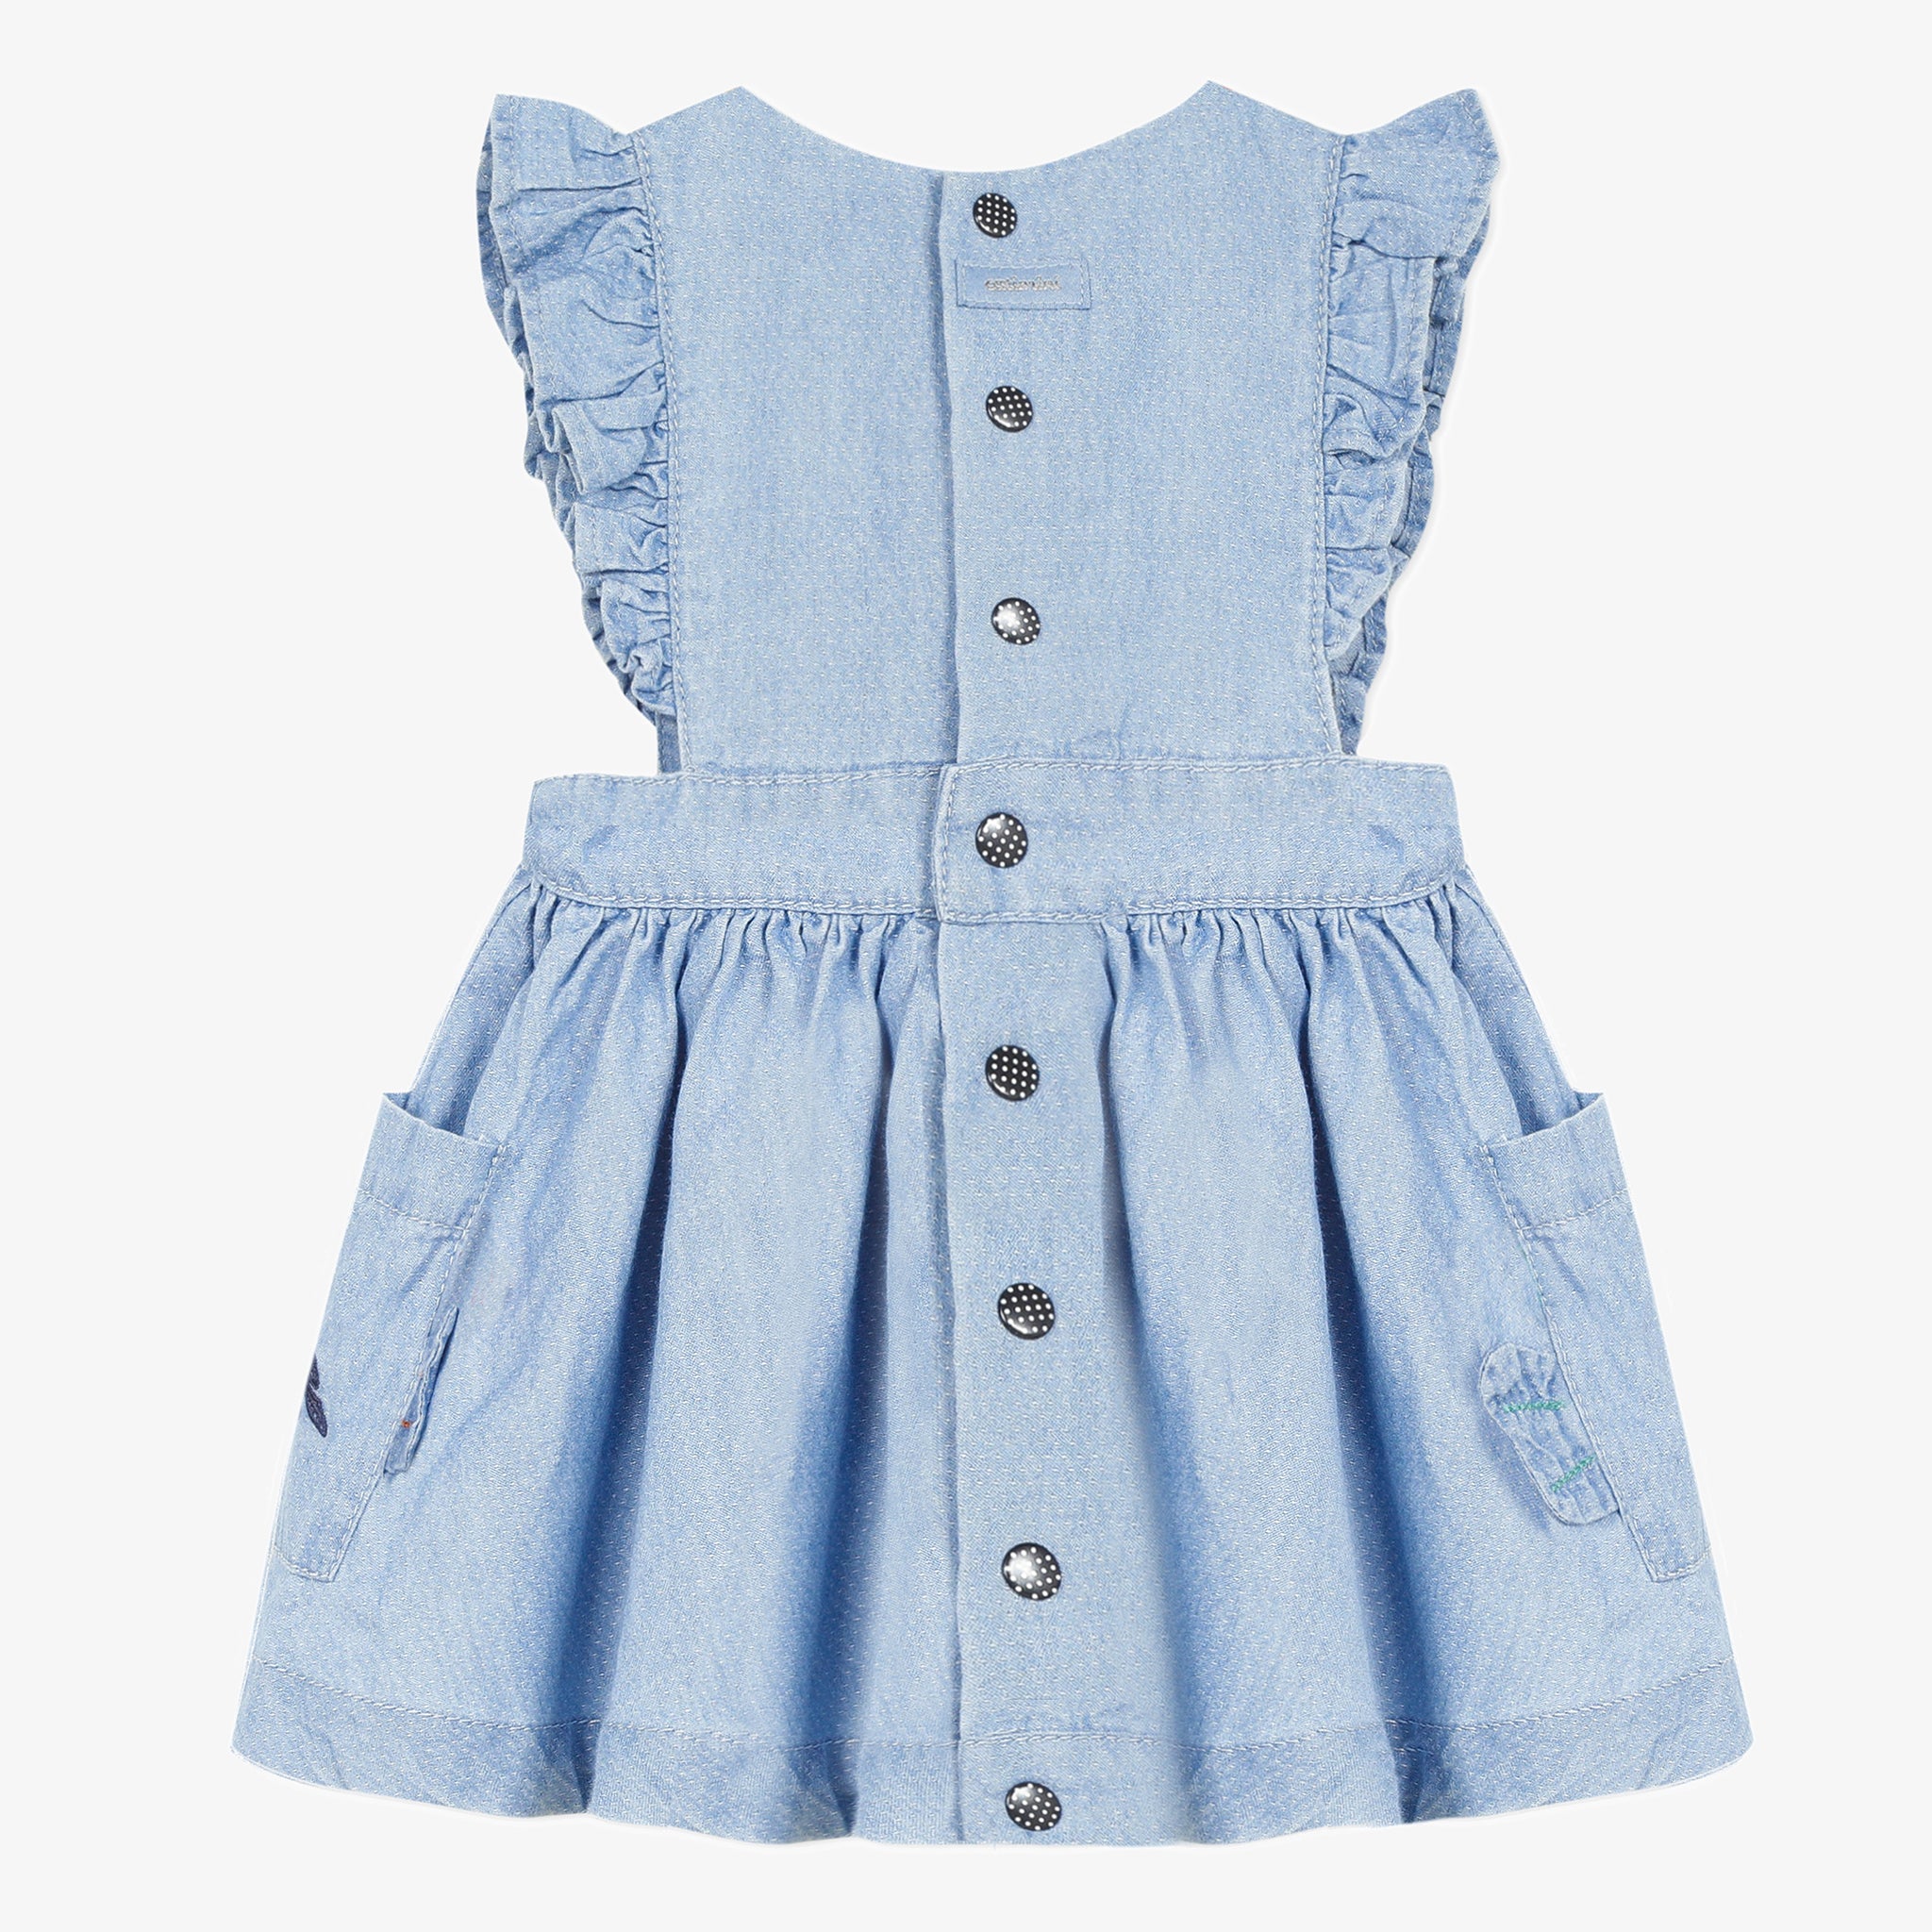 Girls' Denim Pinafore Dress from Crew Clothing Company